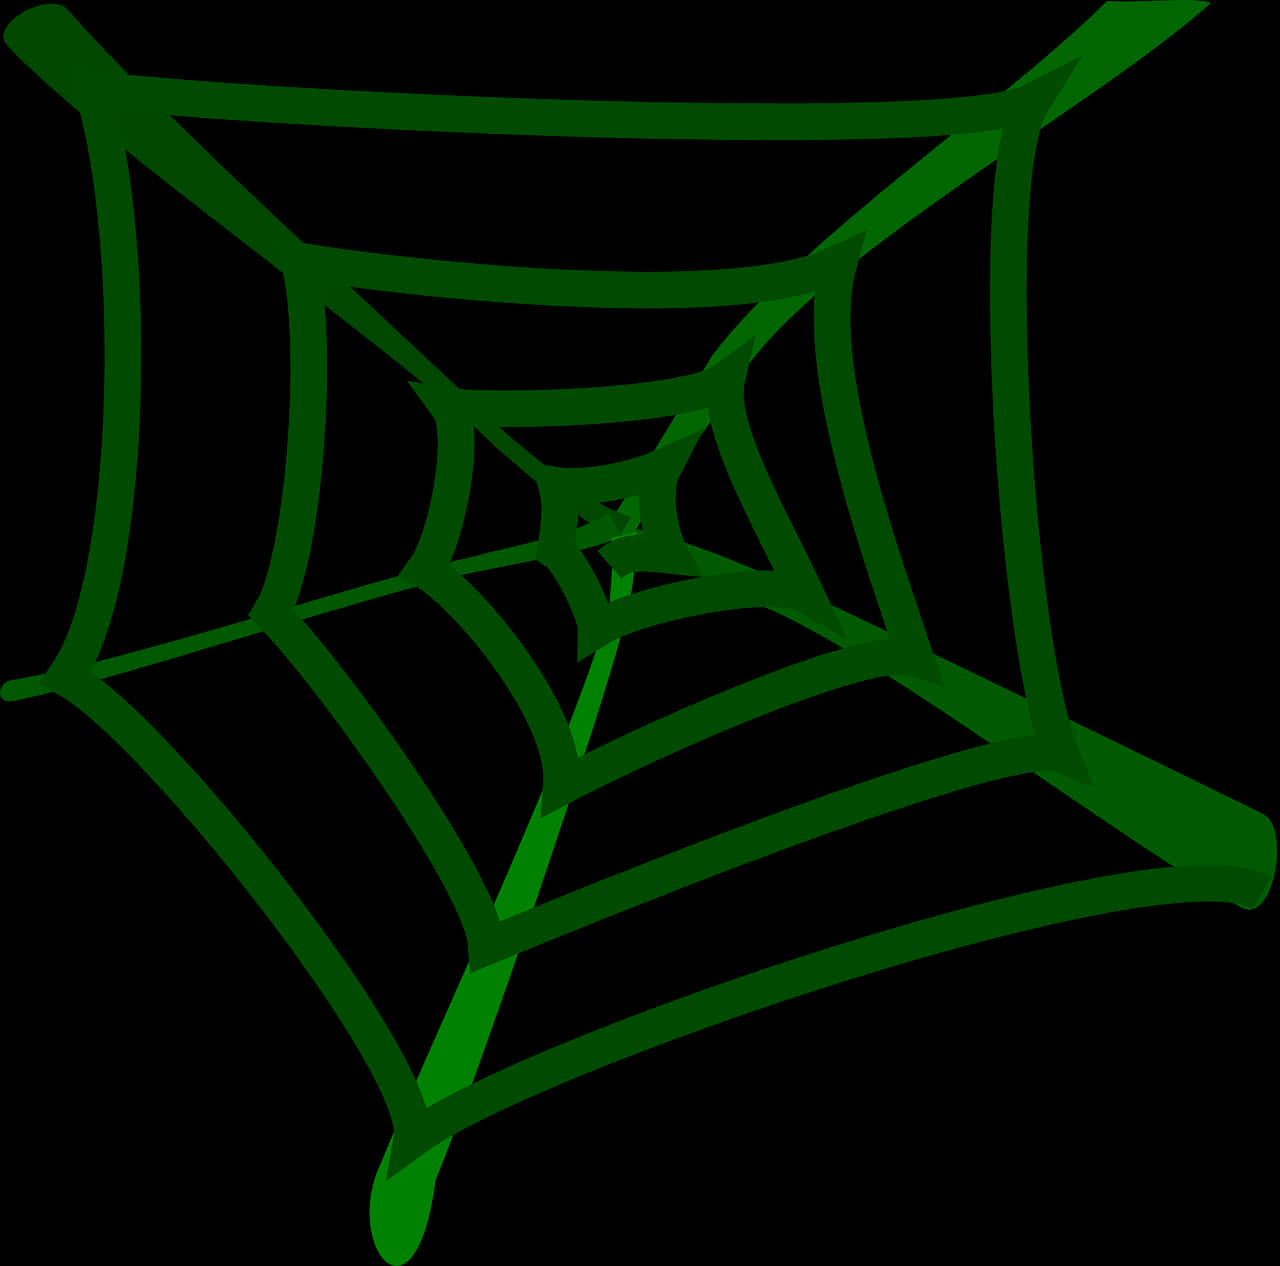 A Green Spider Web On A Black Background